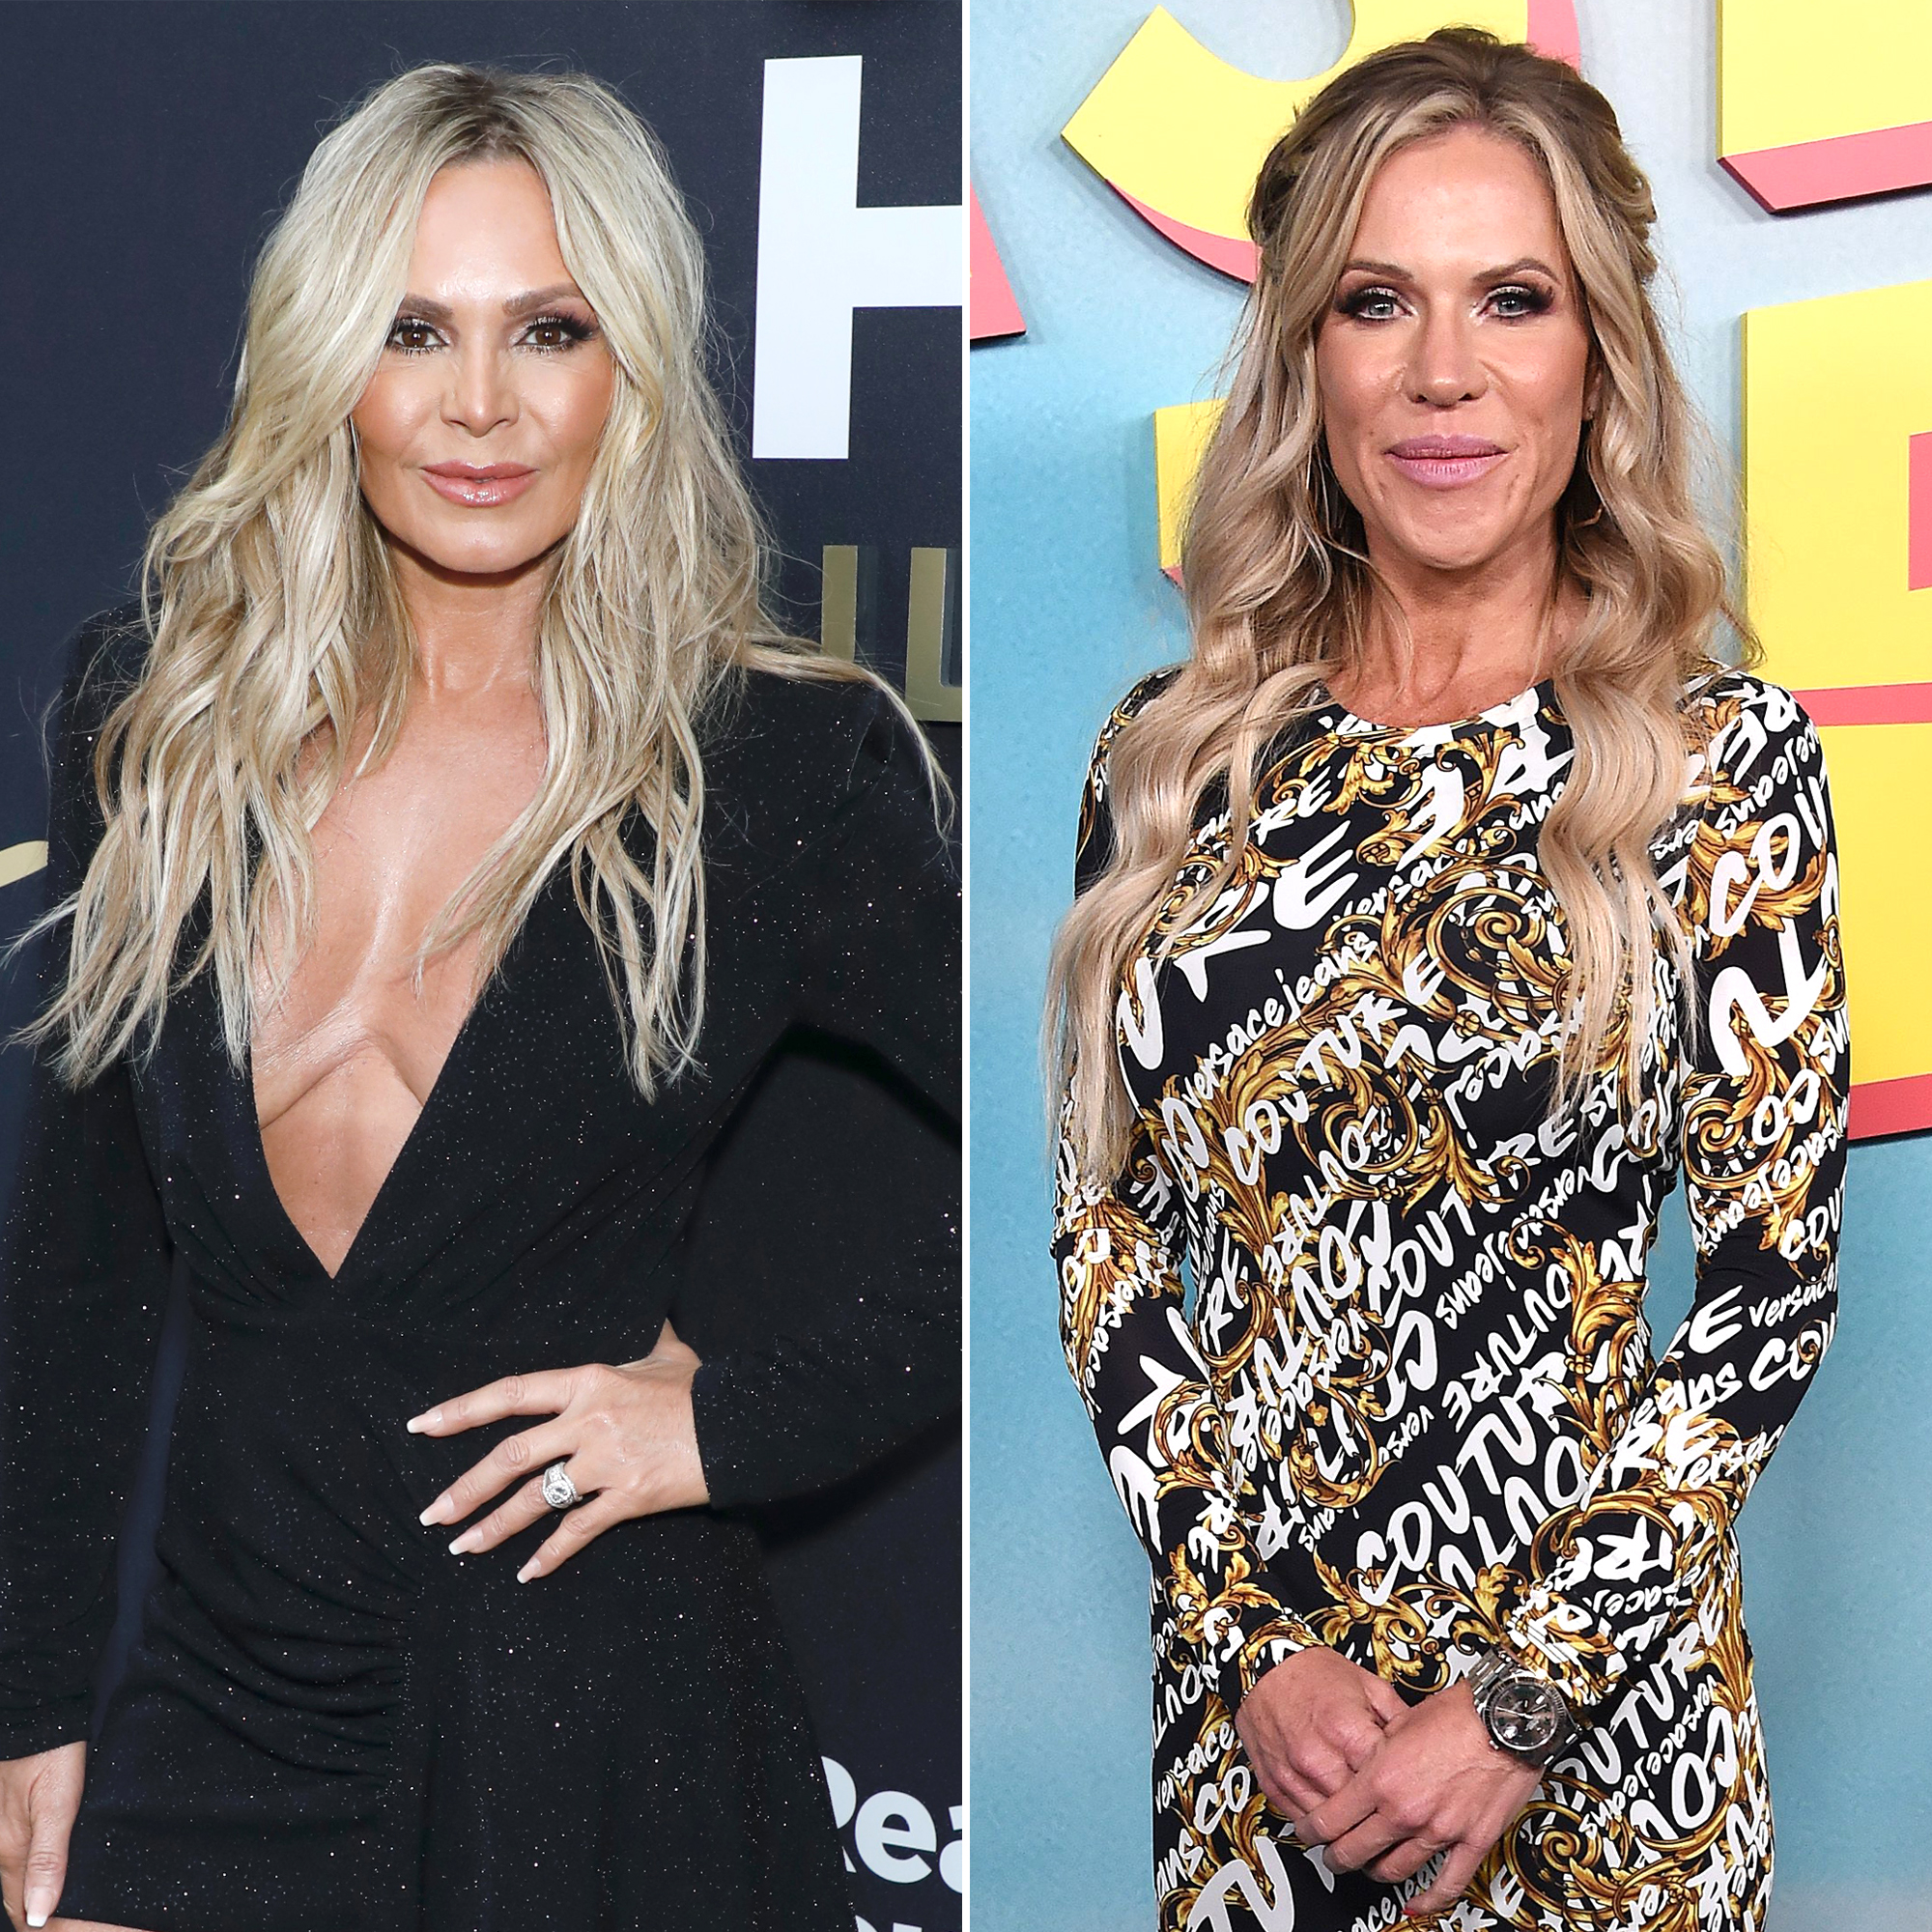 RHOCs Tamra Judge Fires Back Over Claim She Acts for Cameras